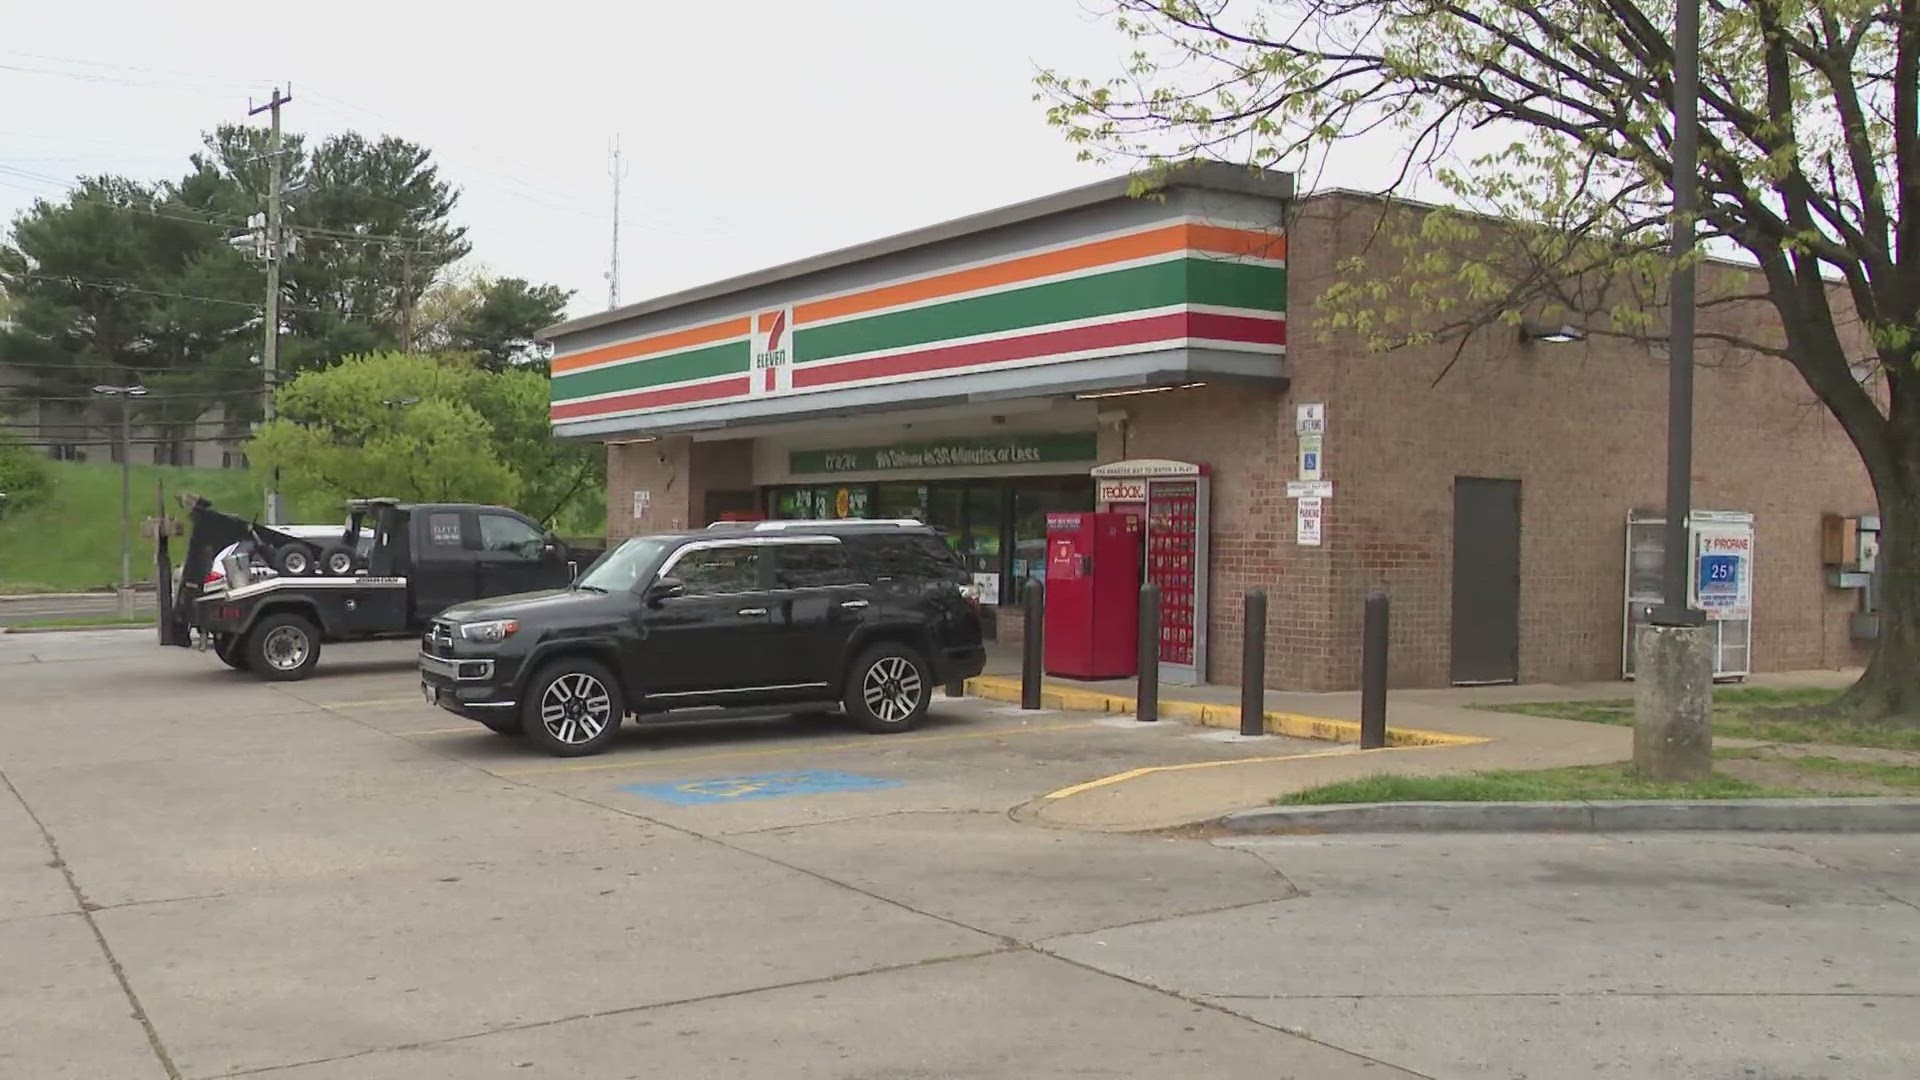 New Carrollton Police confirmed reports of a man robbing a 7-Eleven with a fire extinguisher Sunday morning.